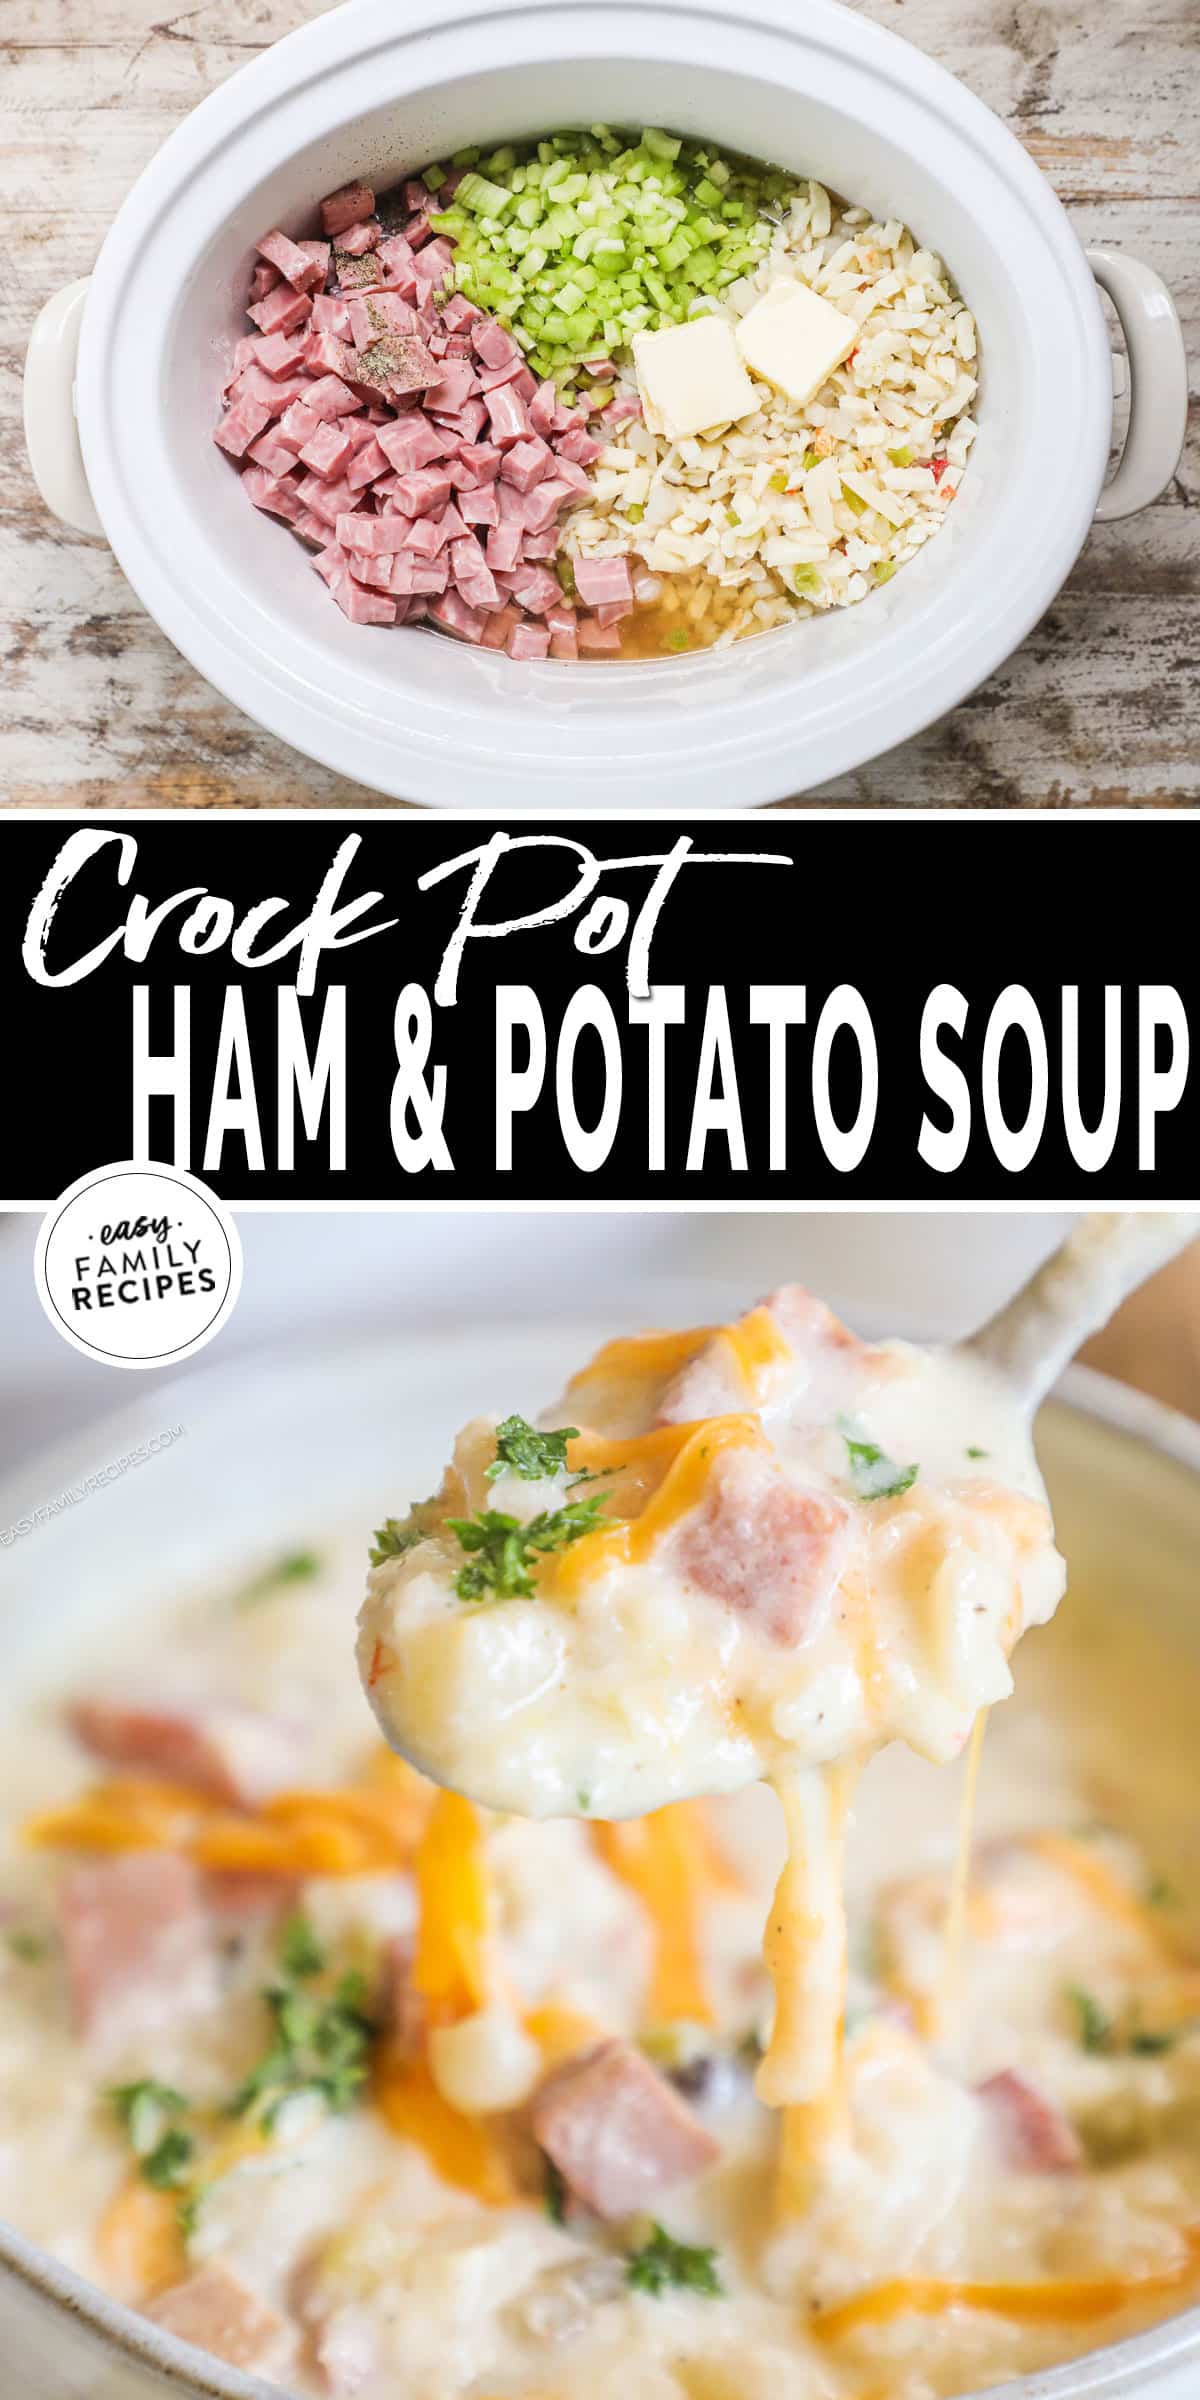 A Crock Pot full of ingredients to make ham and potato soup and a white bowl full of the finished soup topped with cheese.